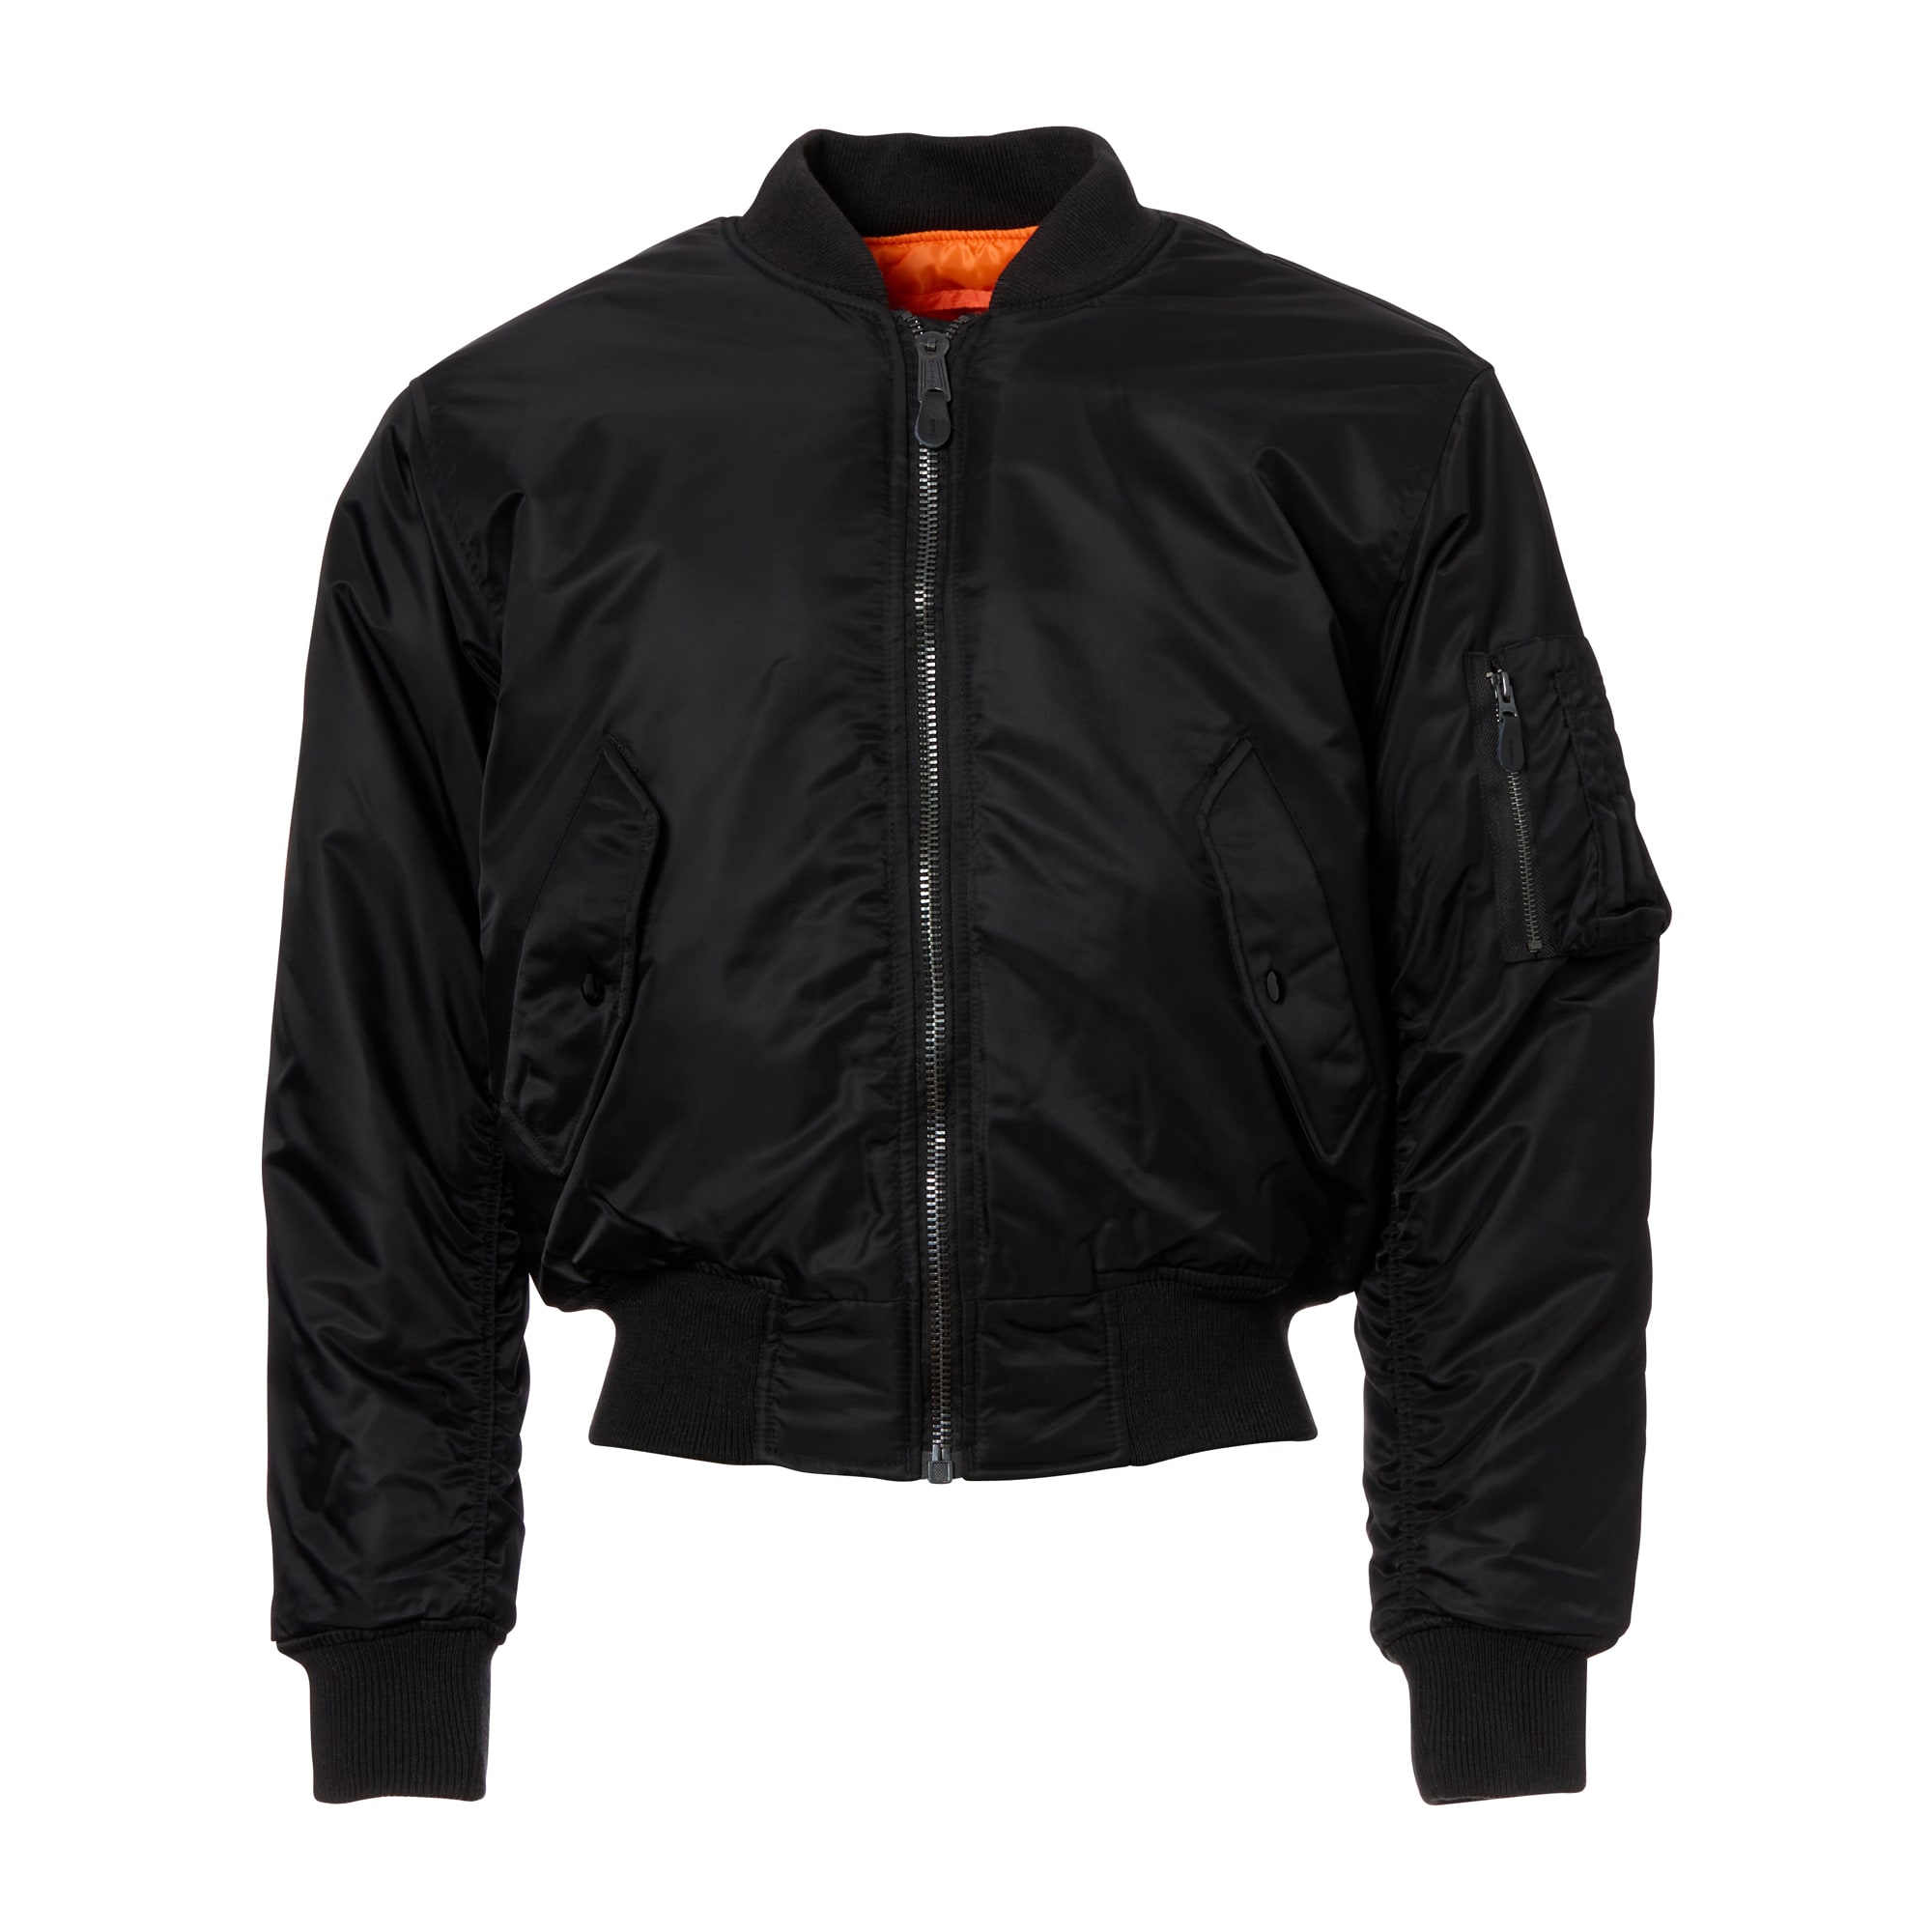 Purchase the Flight Jacket MA-1 Style black by ASMC